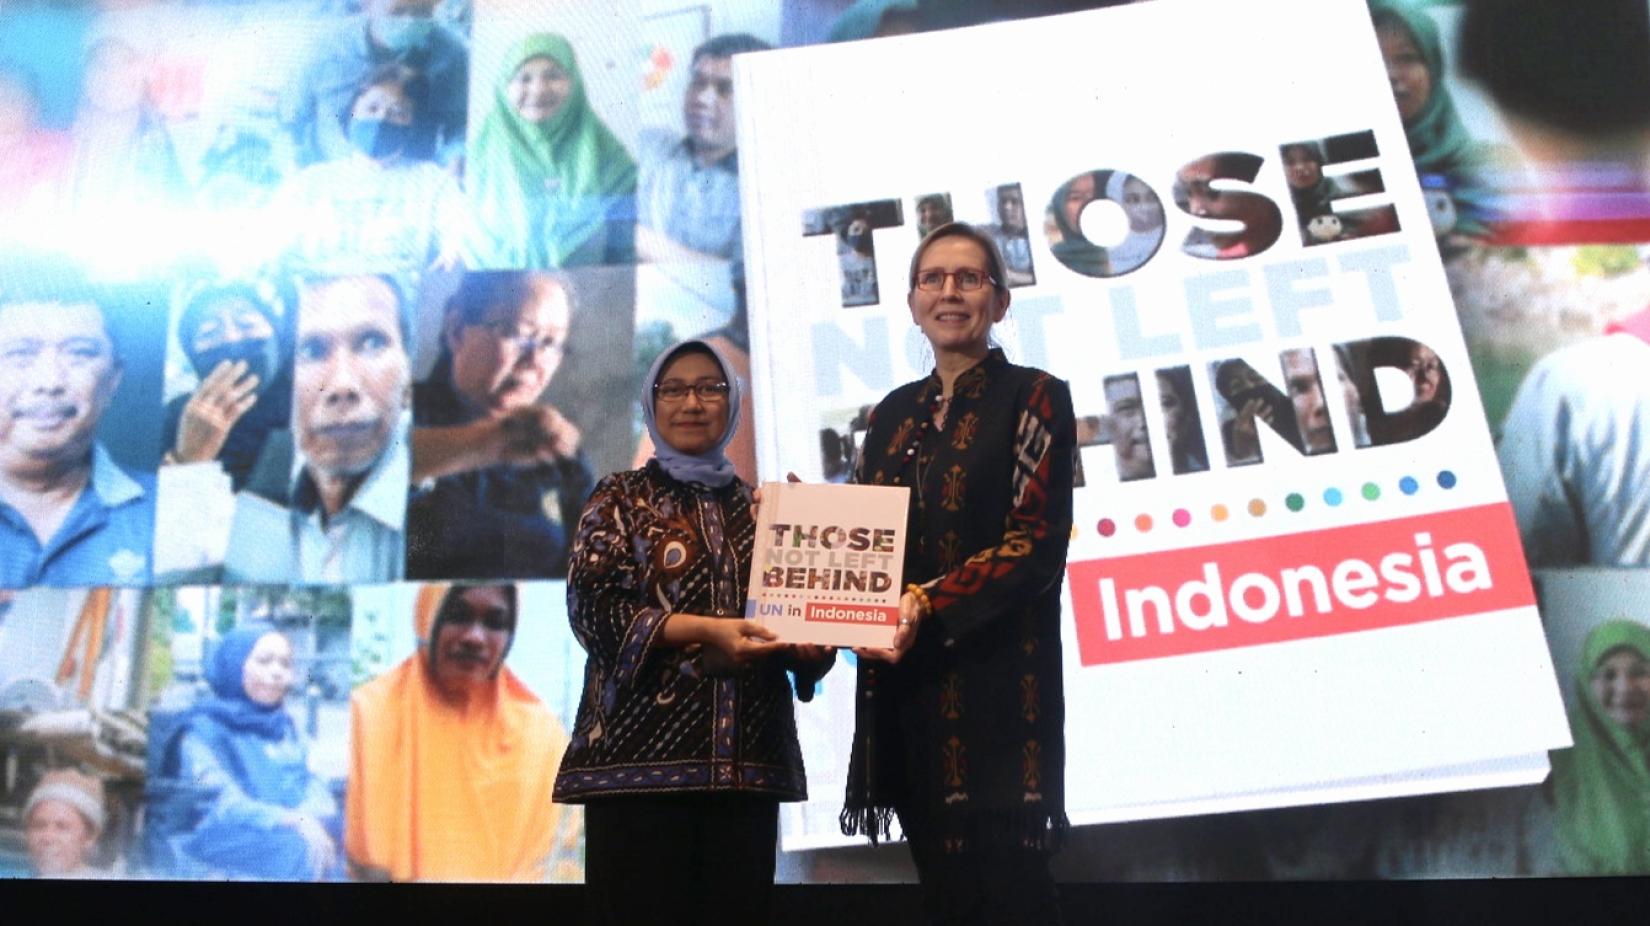 Valerie Julliand and Vivi Yulaswati is posing with Those Not Left Behind book on a stage